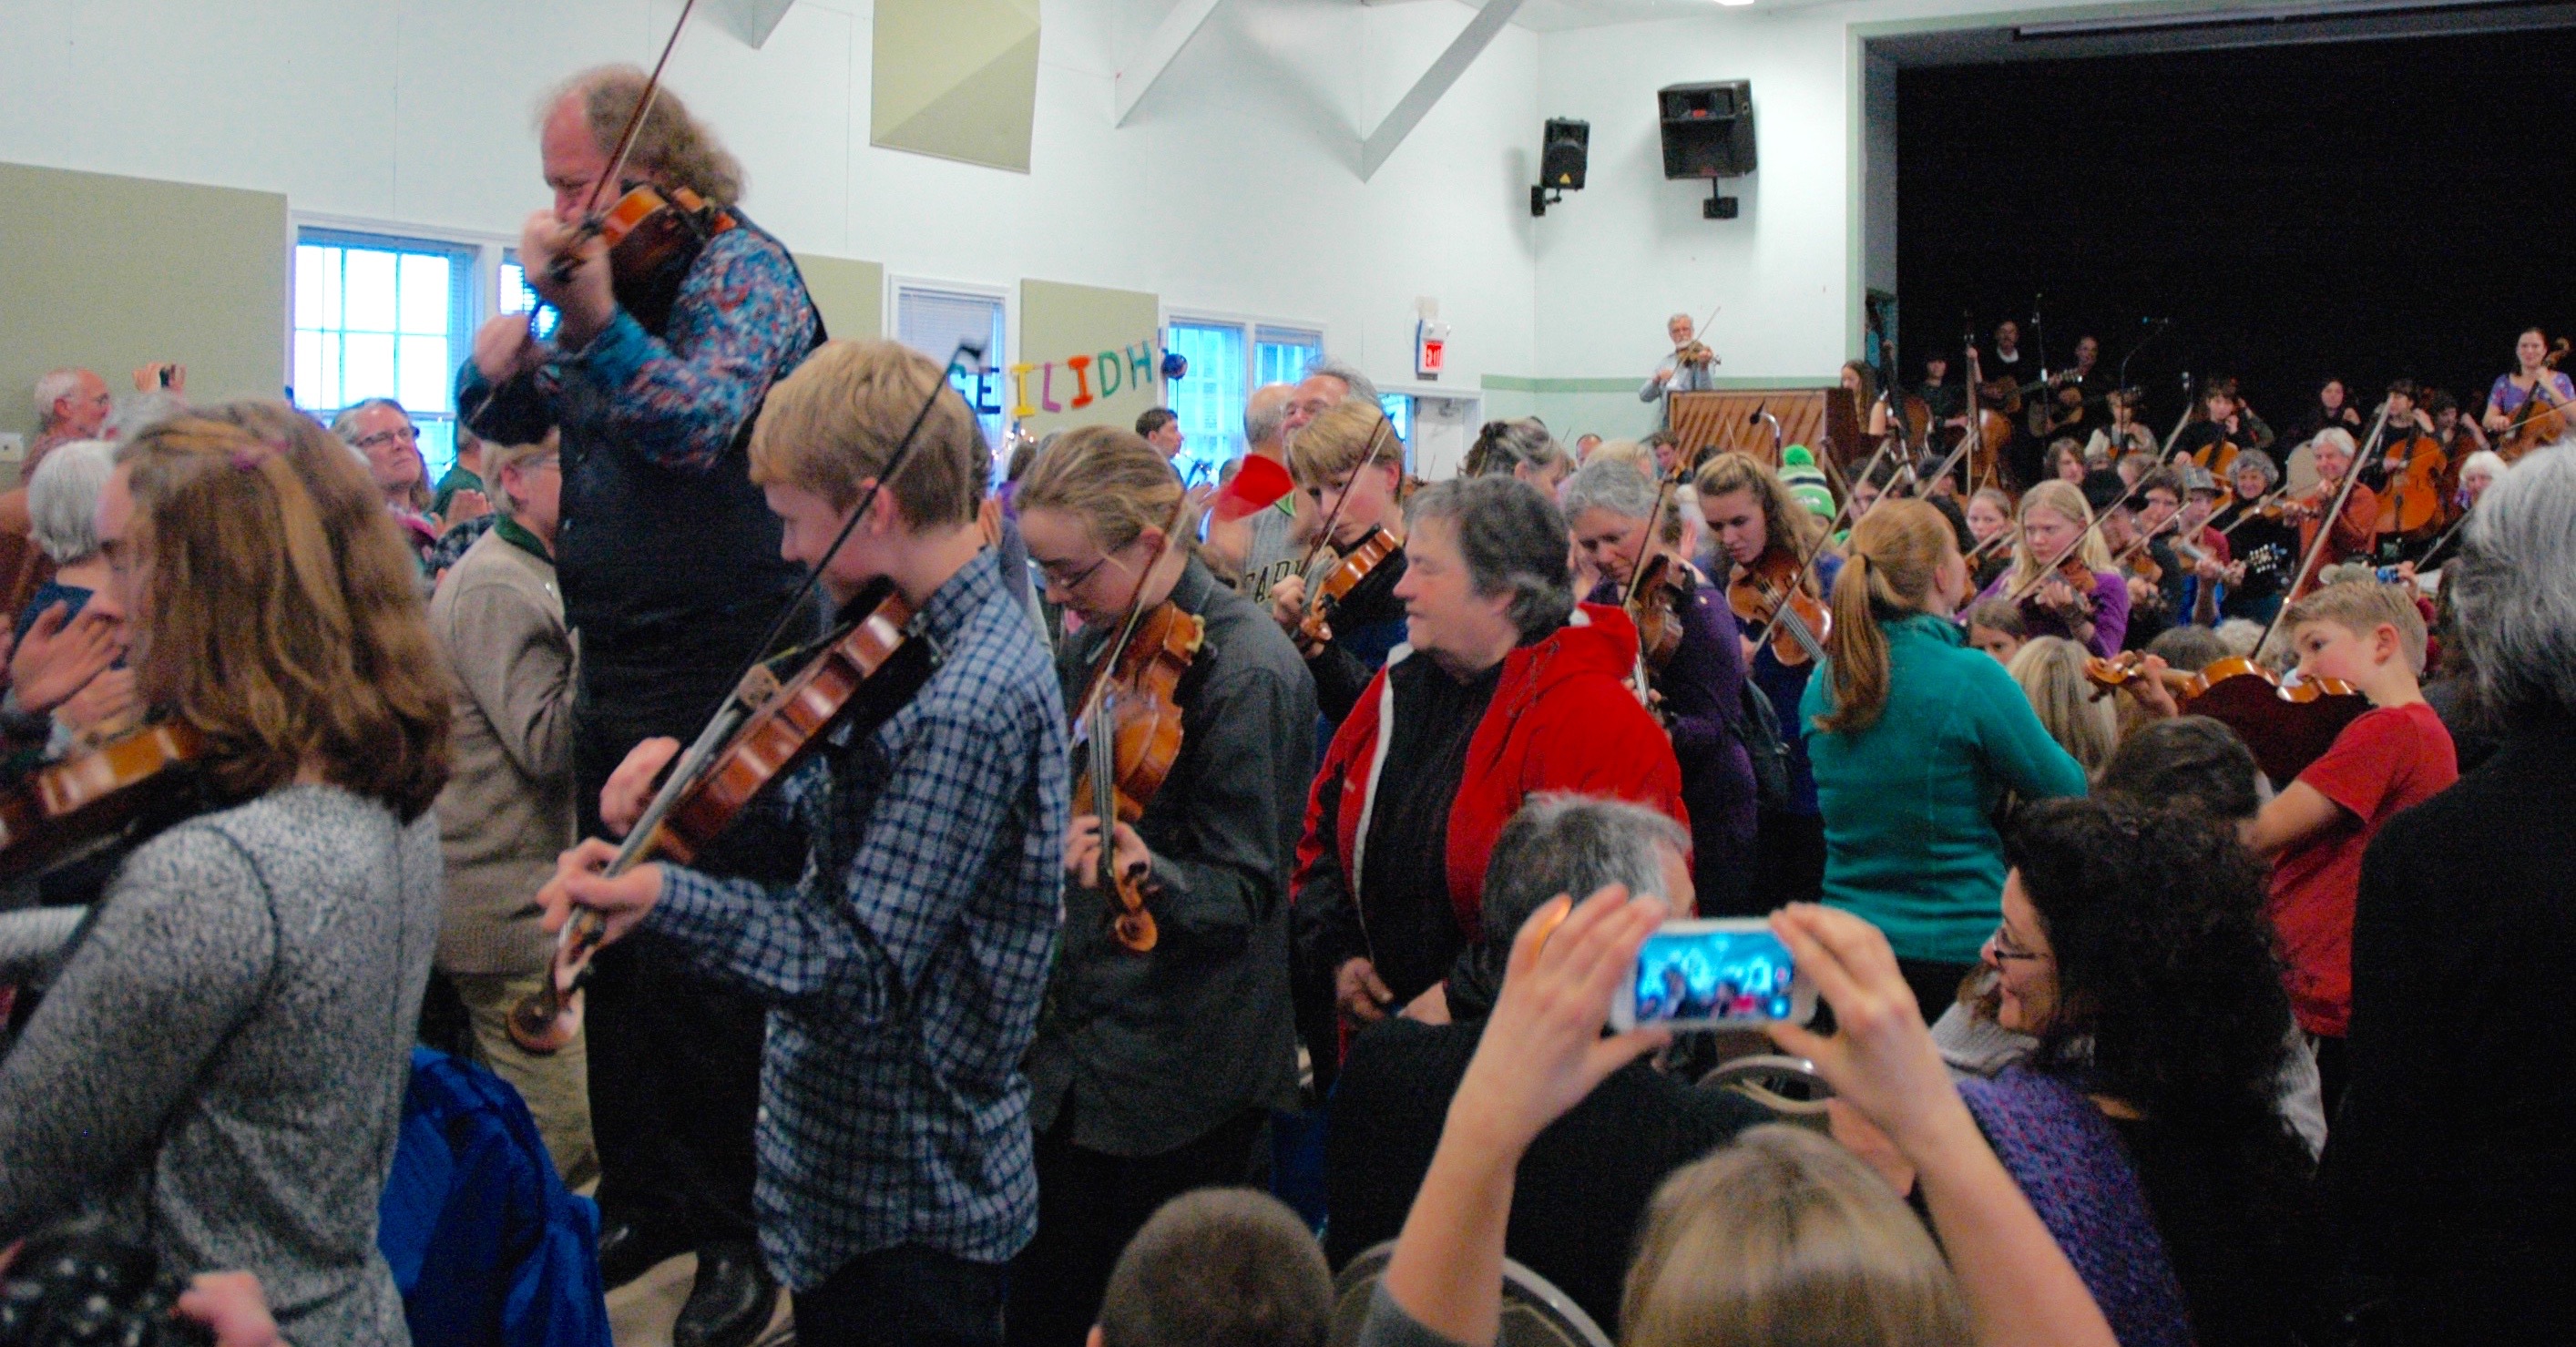 Grand finale - 2016 concert. Musicians mix with the crowd.